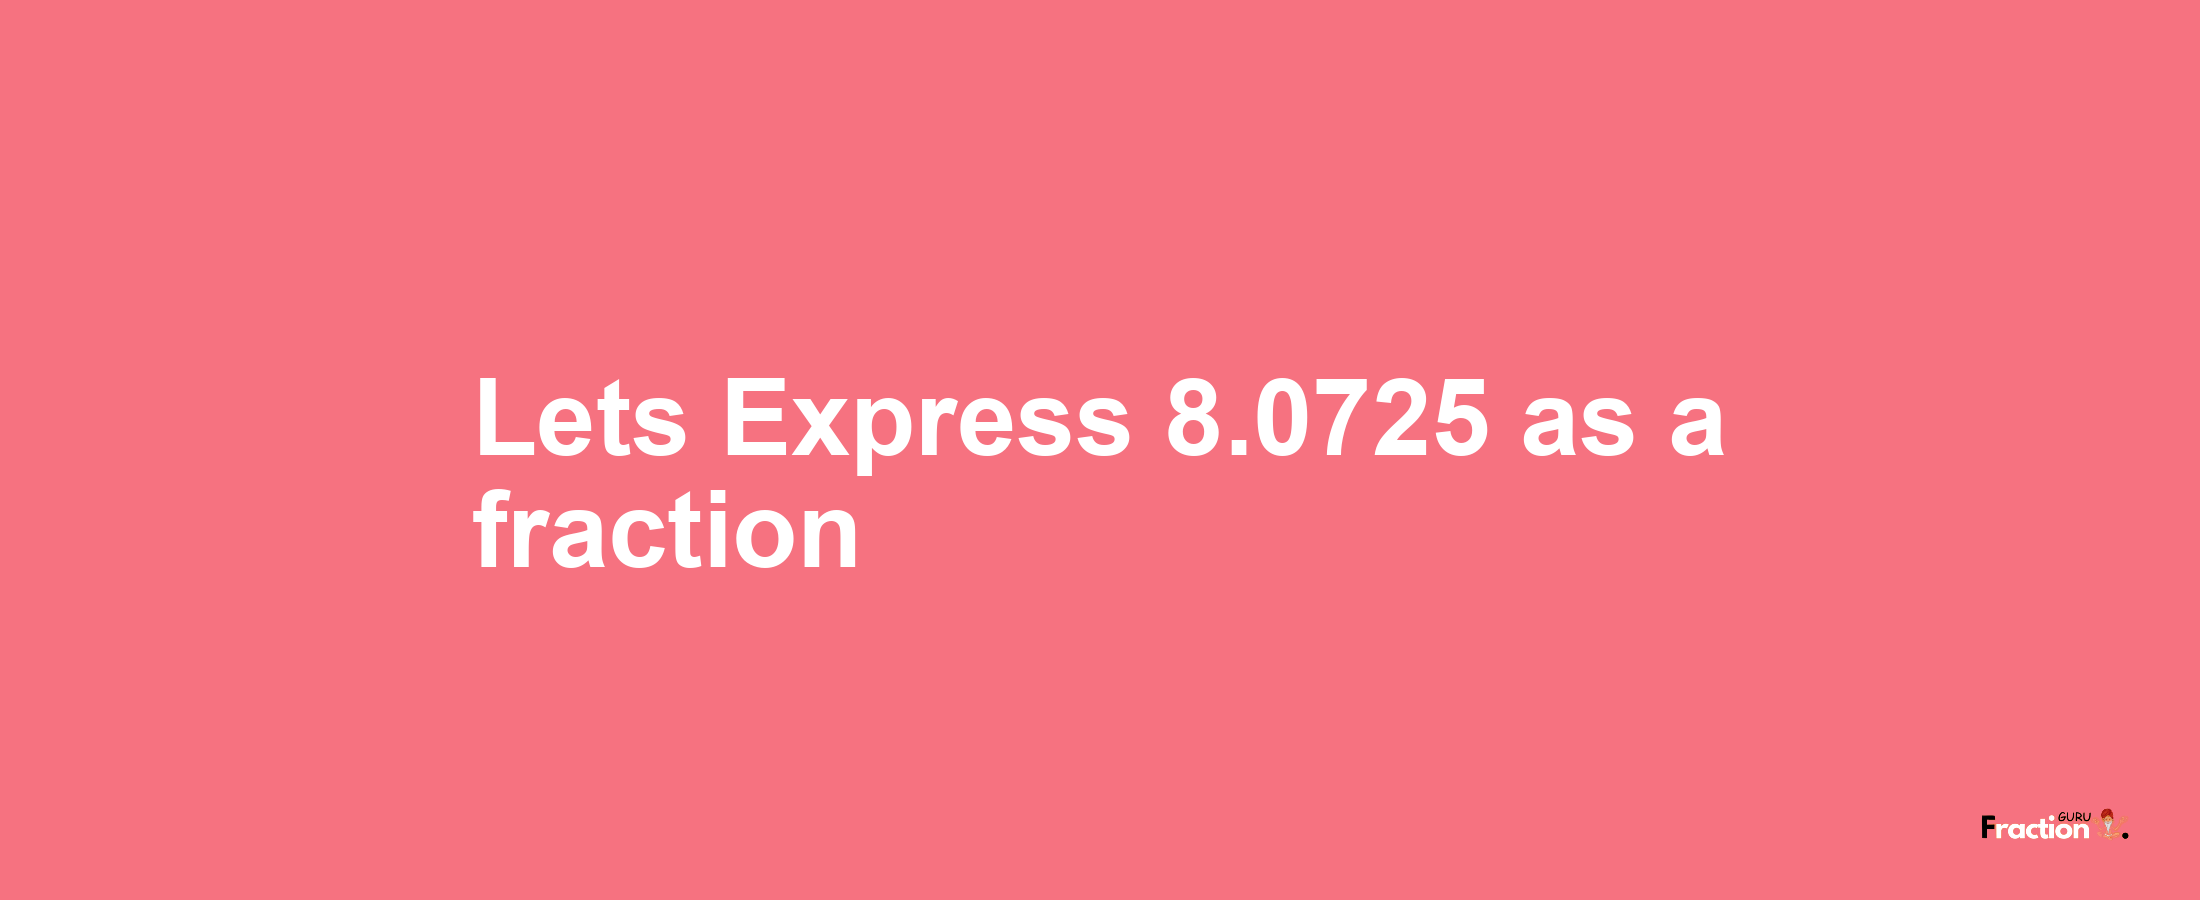 Lets Express 8.0725 as afraction